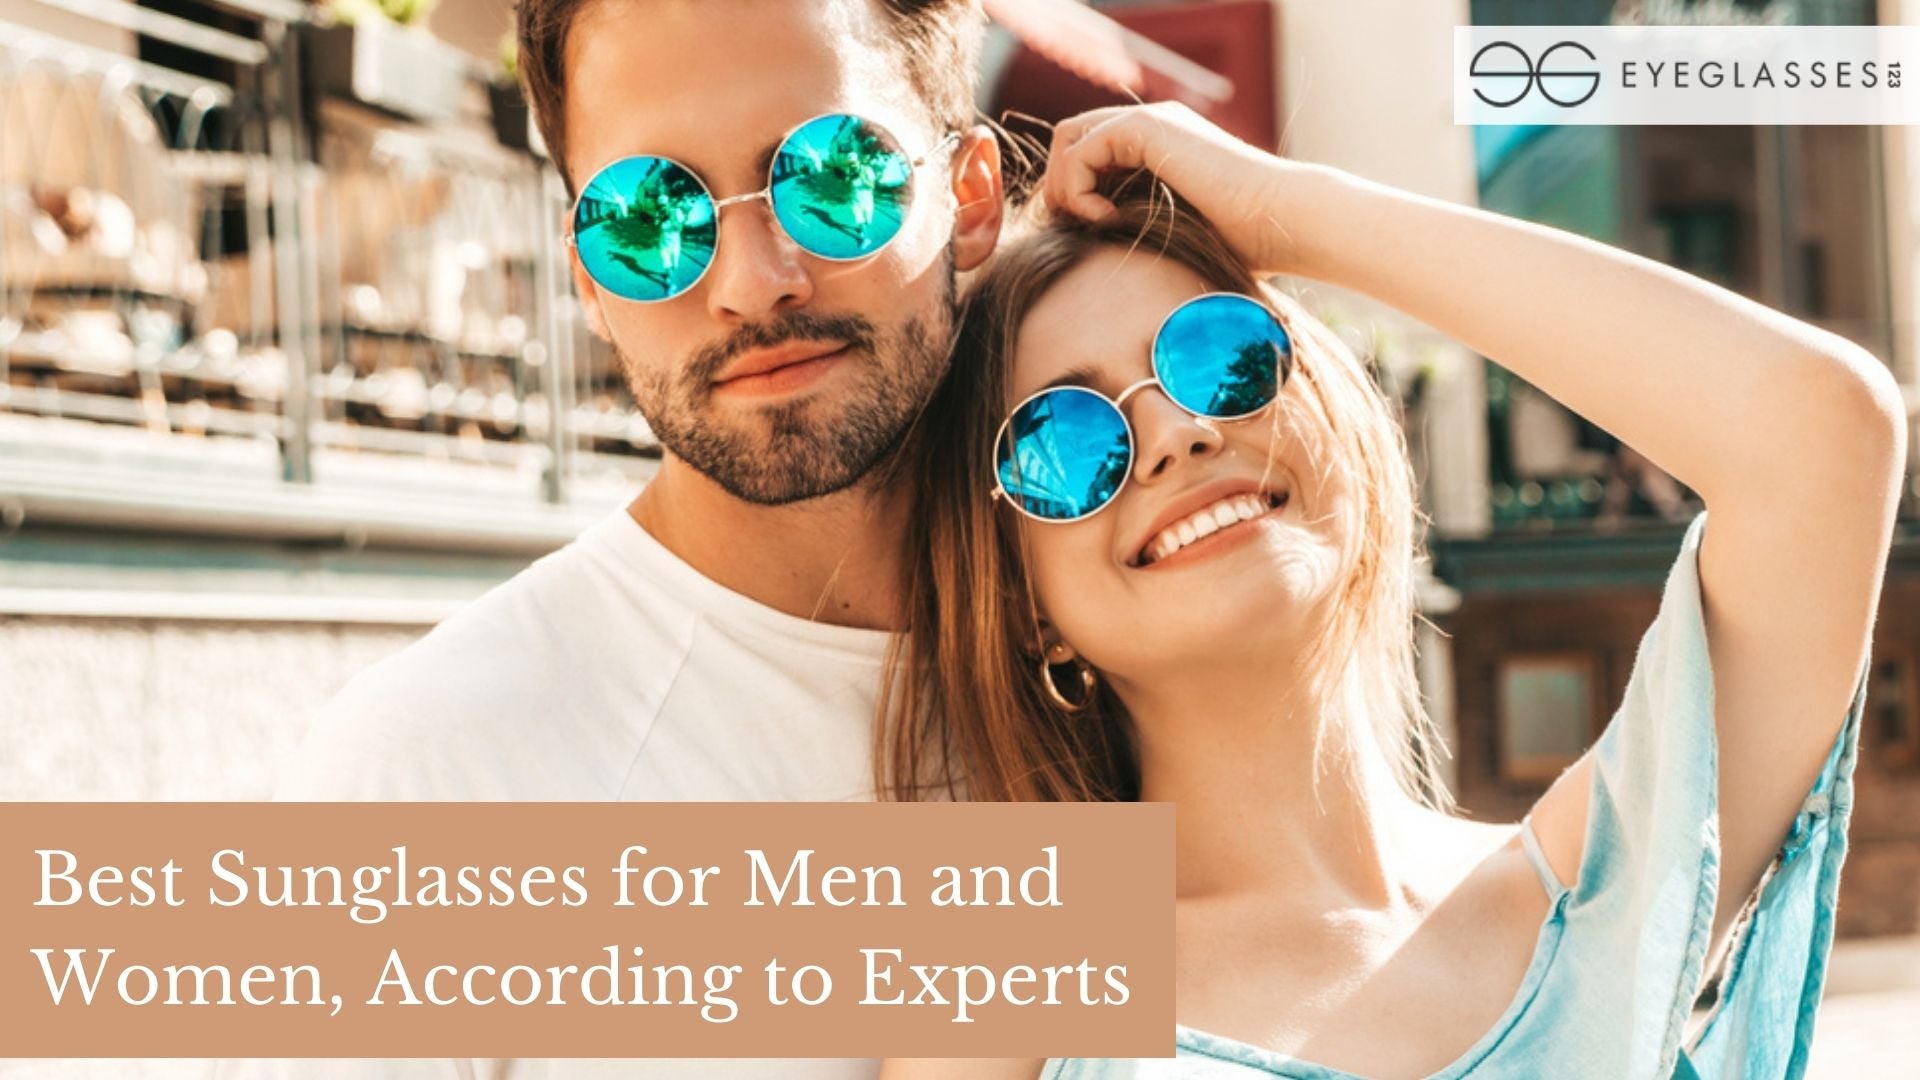 Best Sunglasses for Men and Women, According to Experts